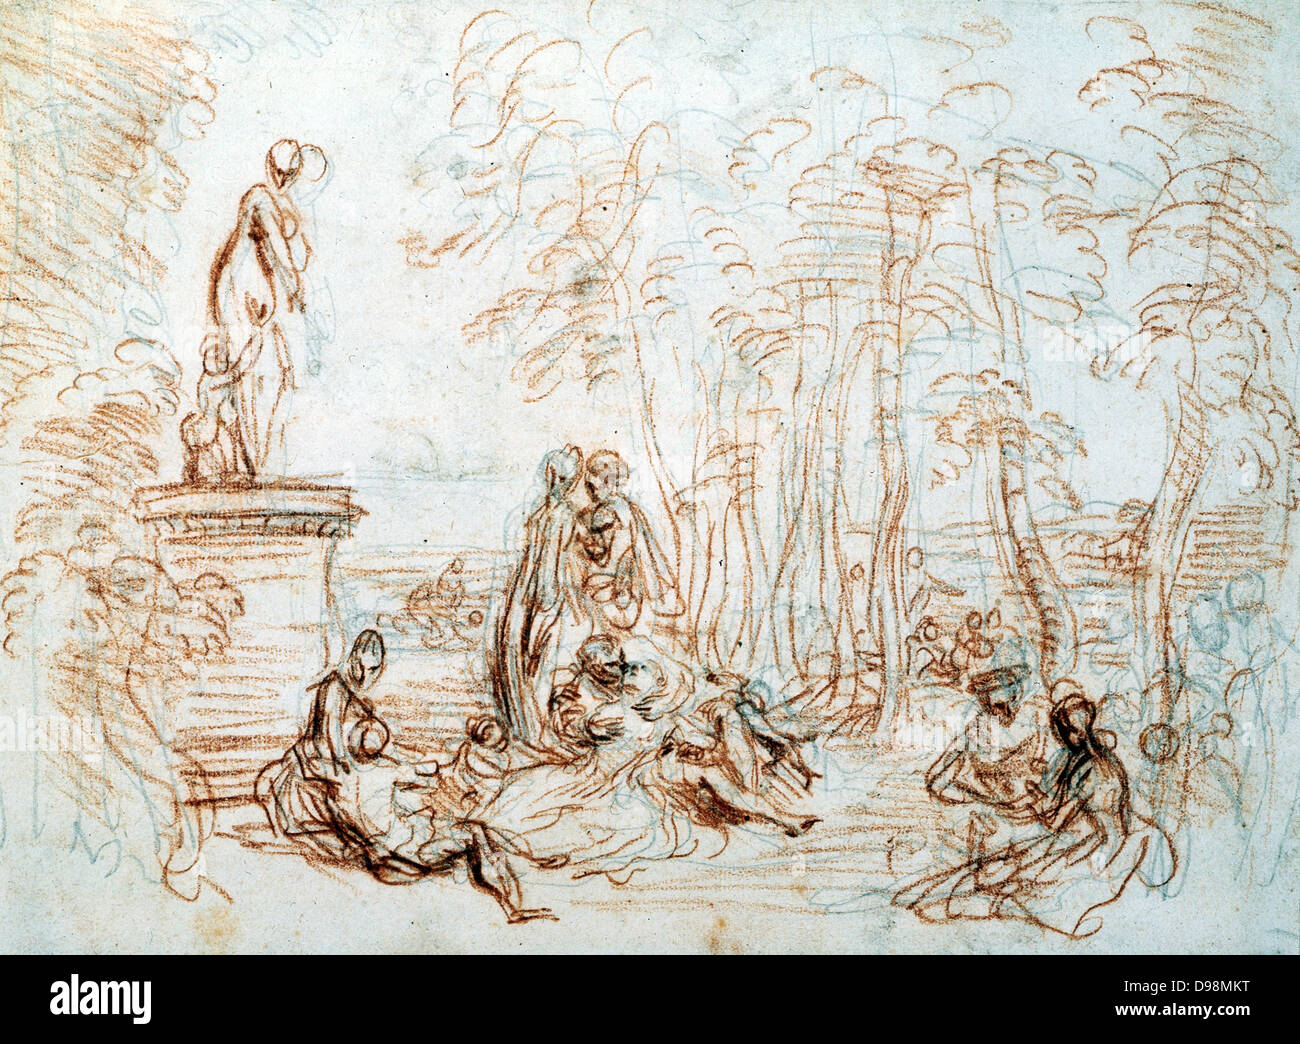 Study for 'The Pleasures of Love'. Jean-Antoine Watteau (1684-1721) French Rococo painter. Stock Photo